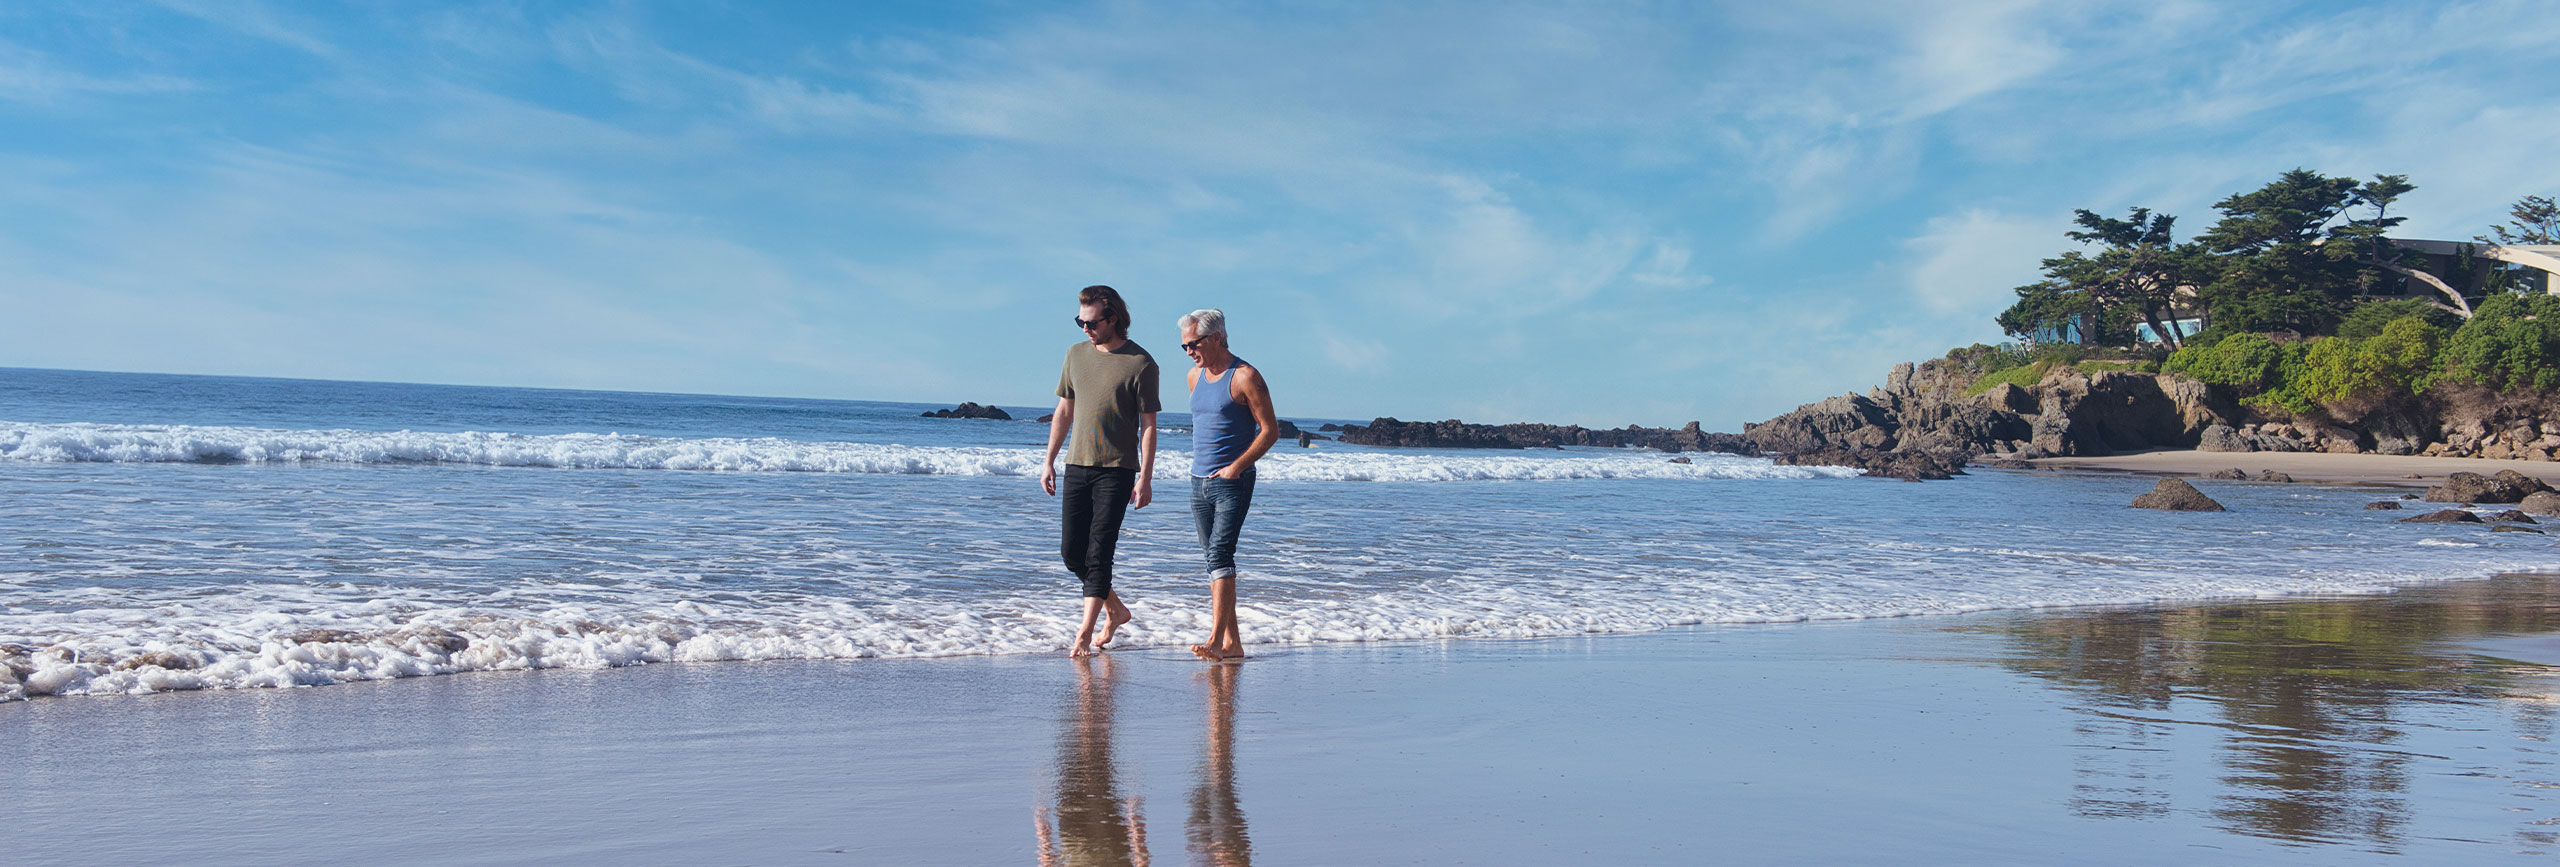 Two luxury rehab clients walking along the beach.